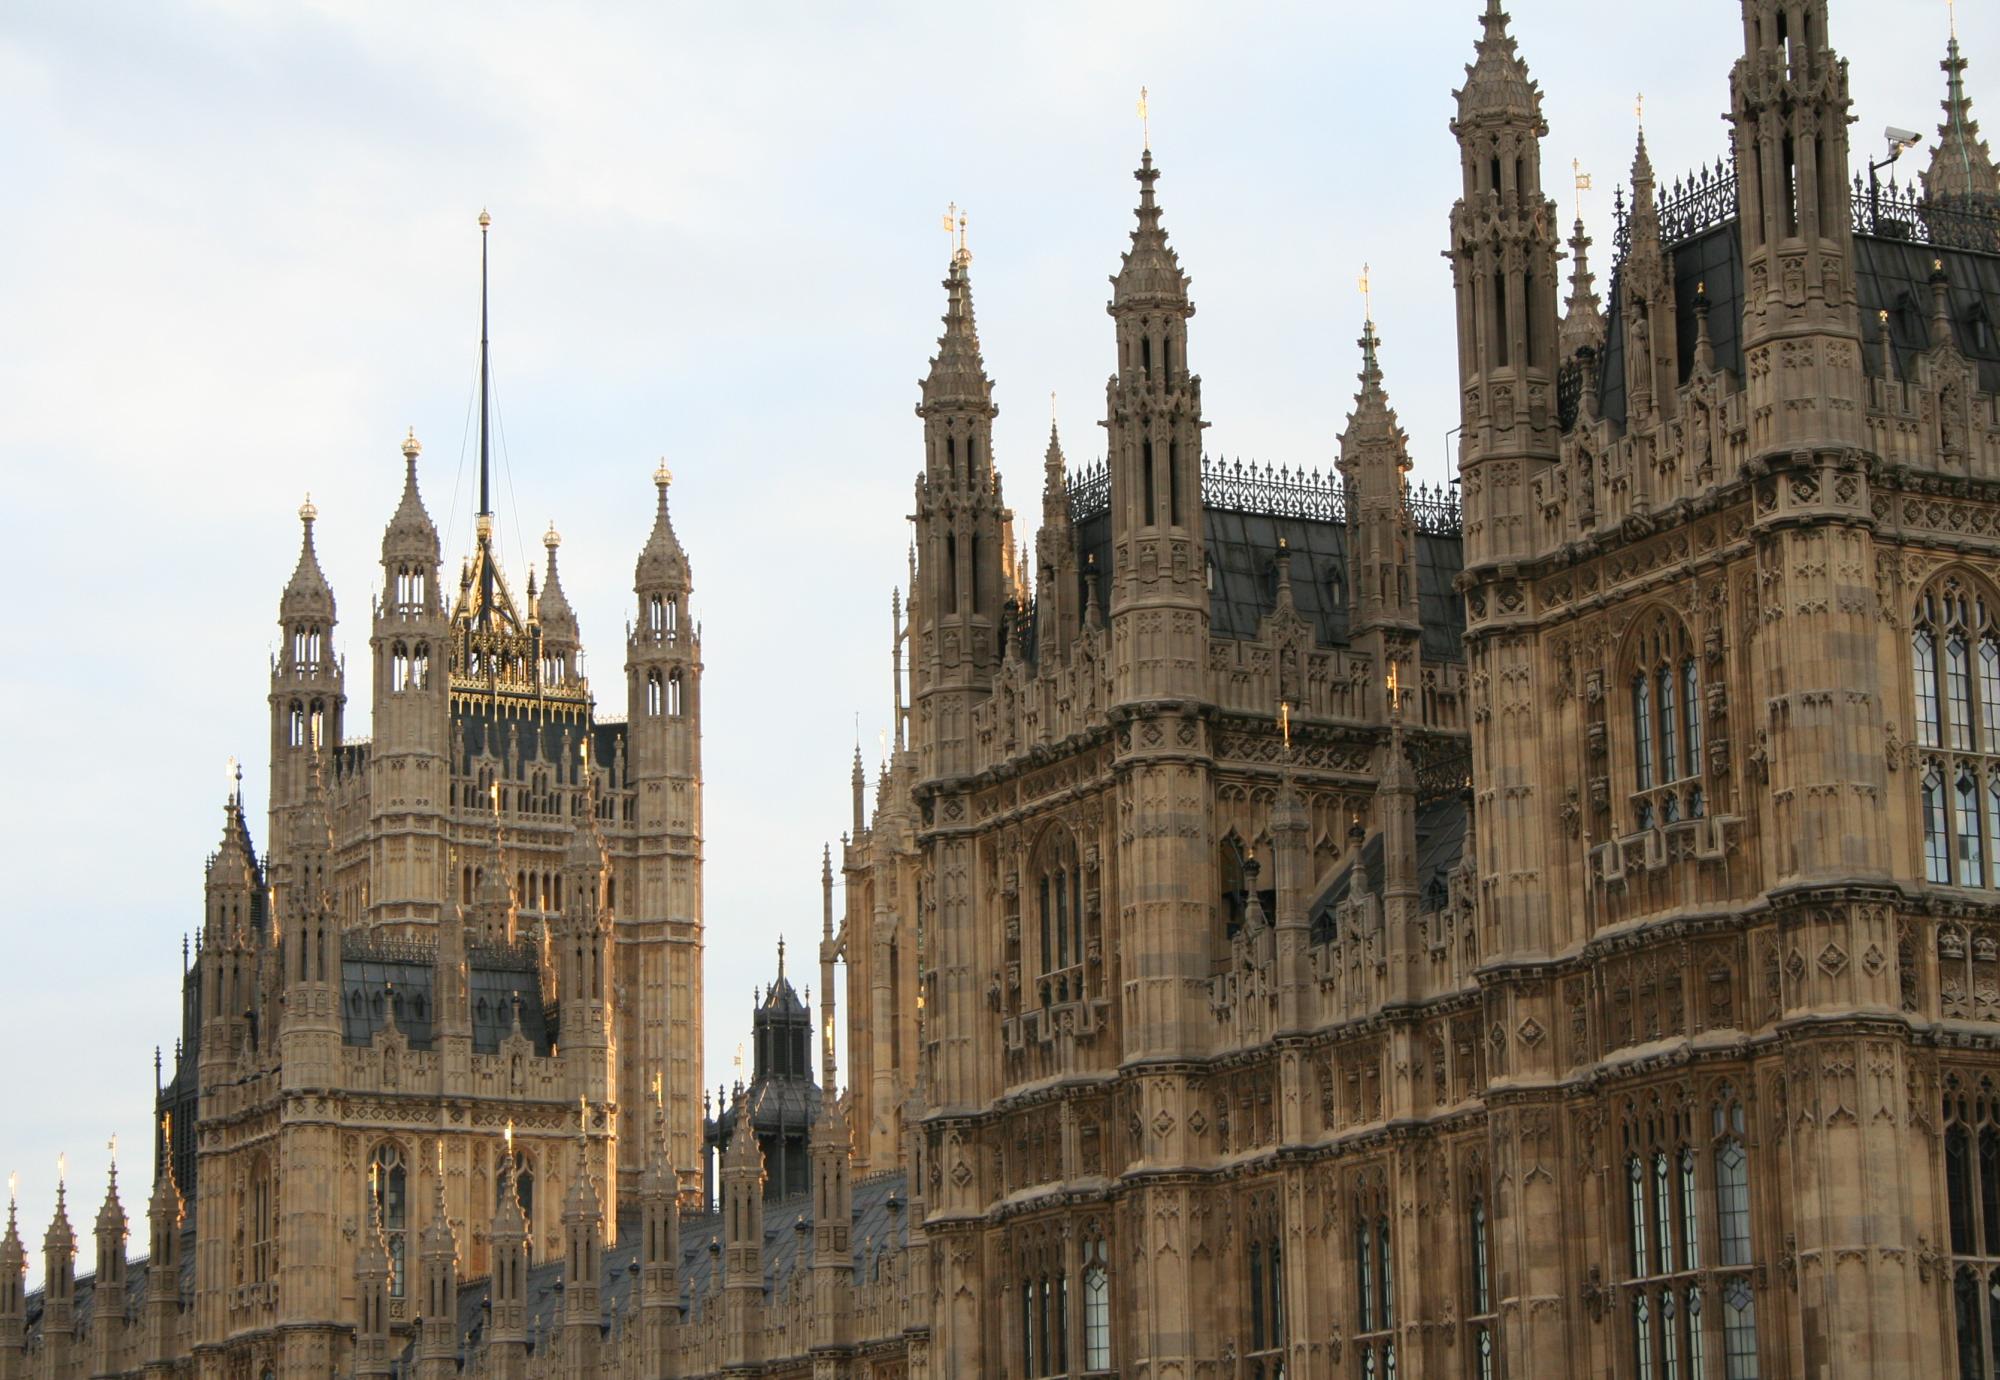 The Houses of Parliament, The Palace of Westminster.